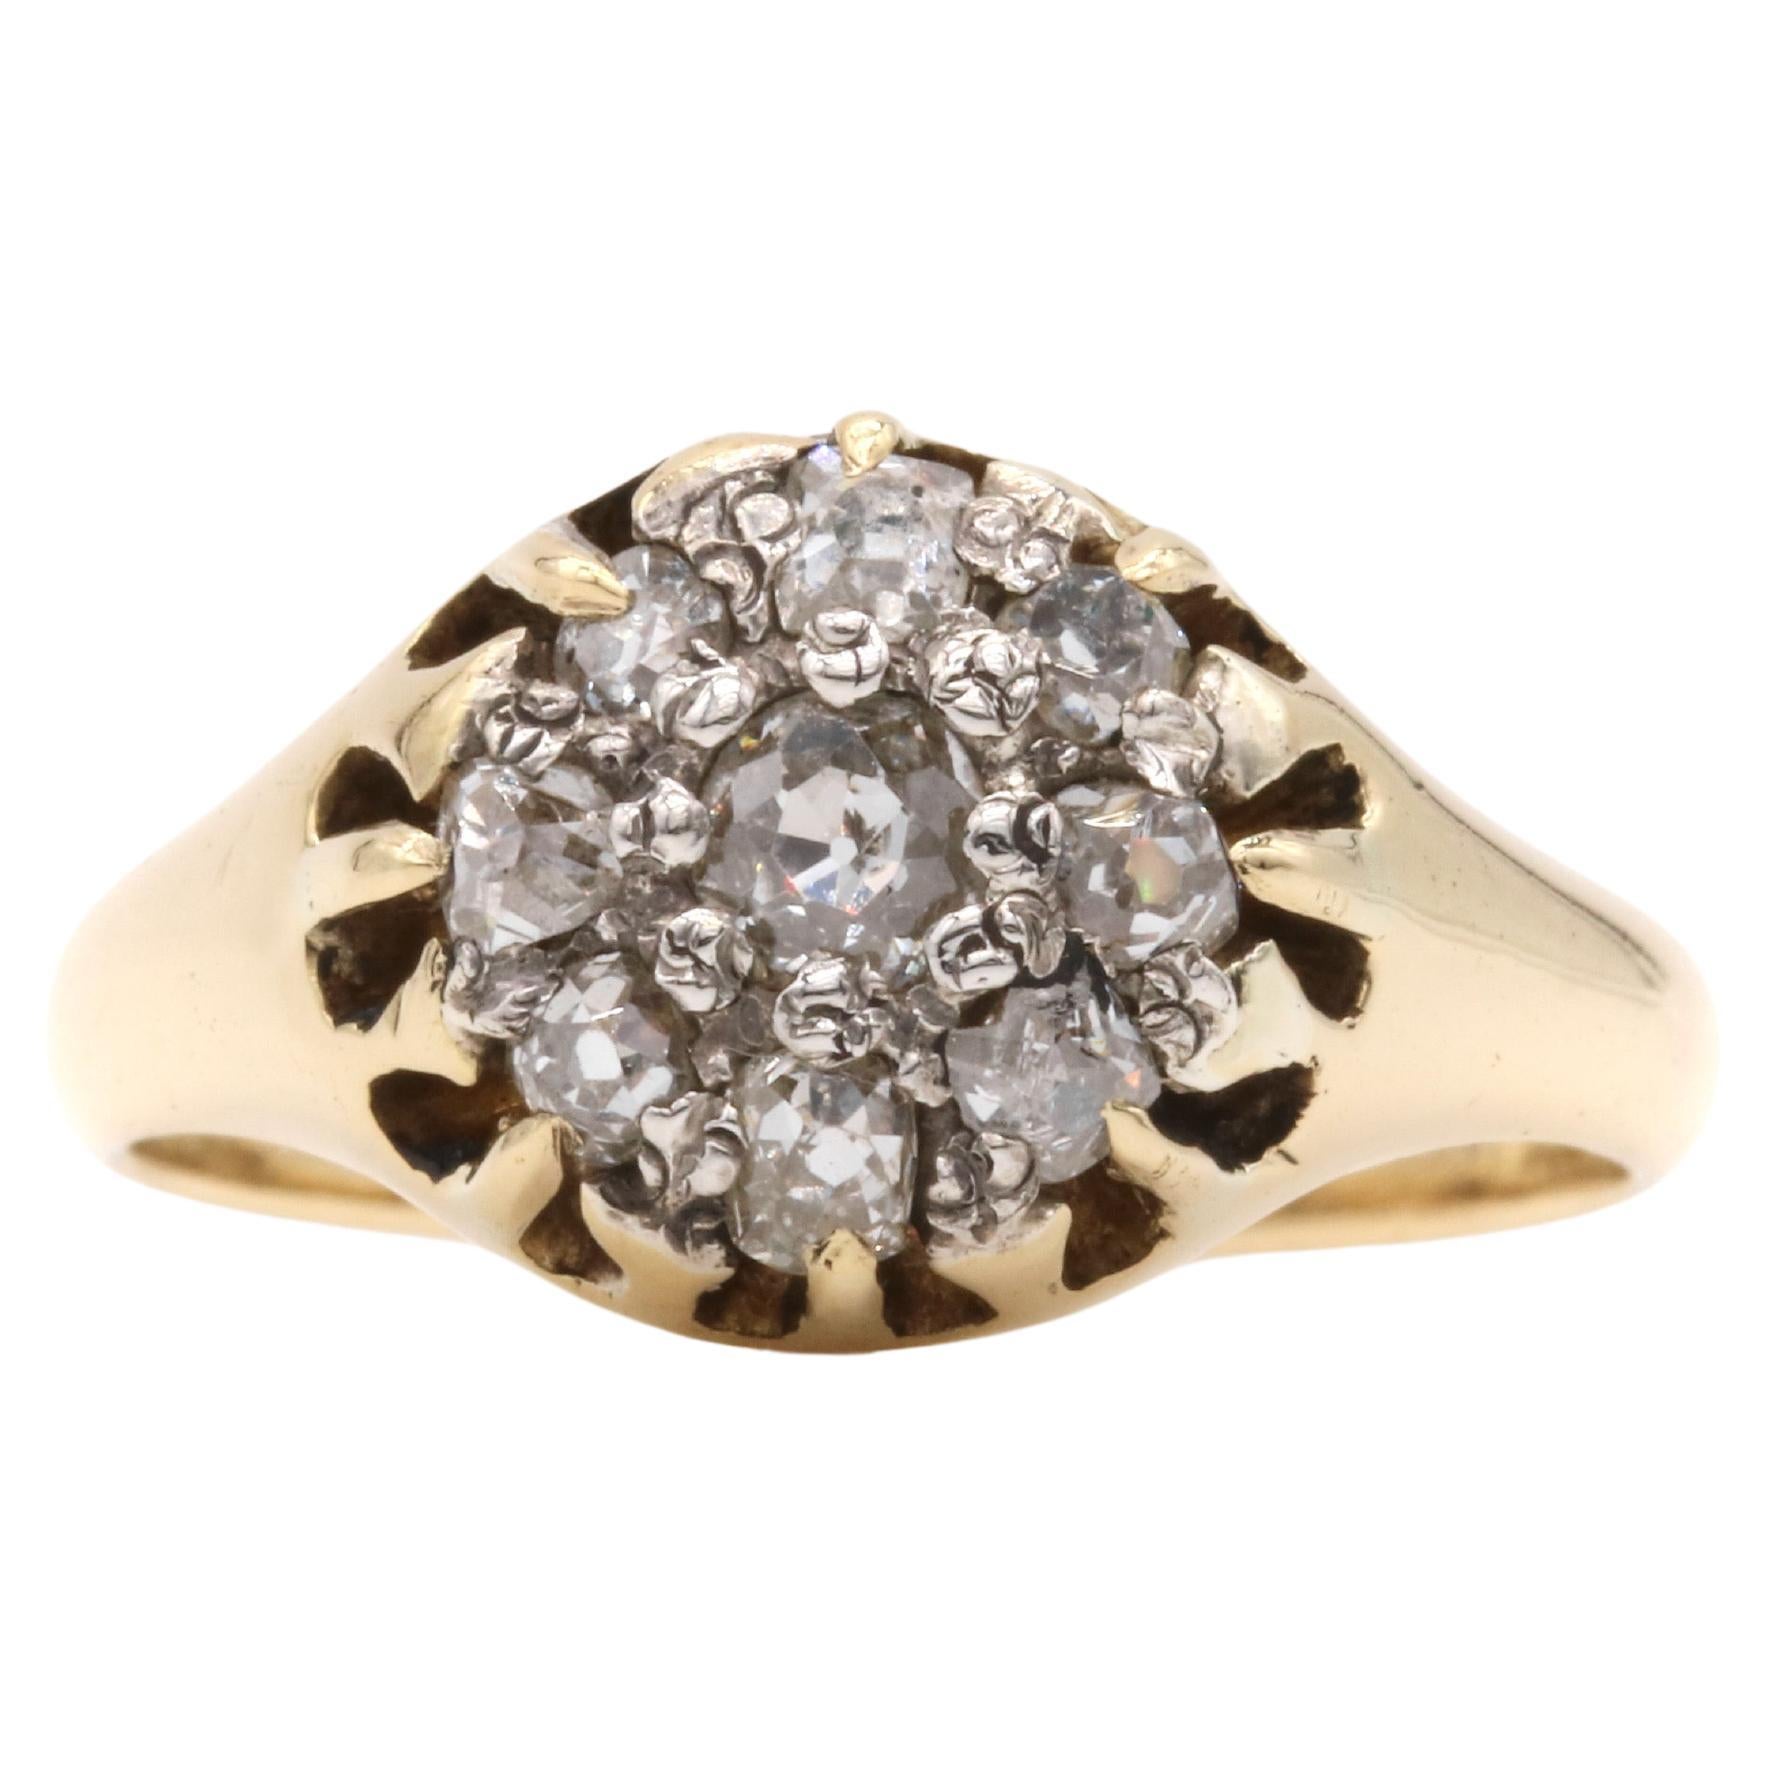 Antique Victorian 18K Yellow Gold and Silver 0.6ctw Diamond Cluster Ring